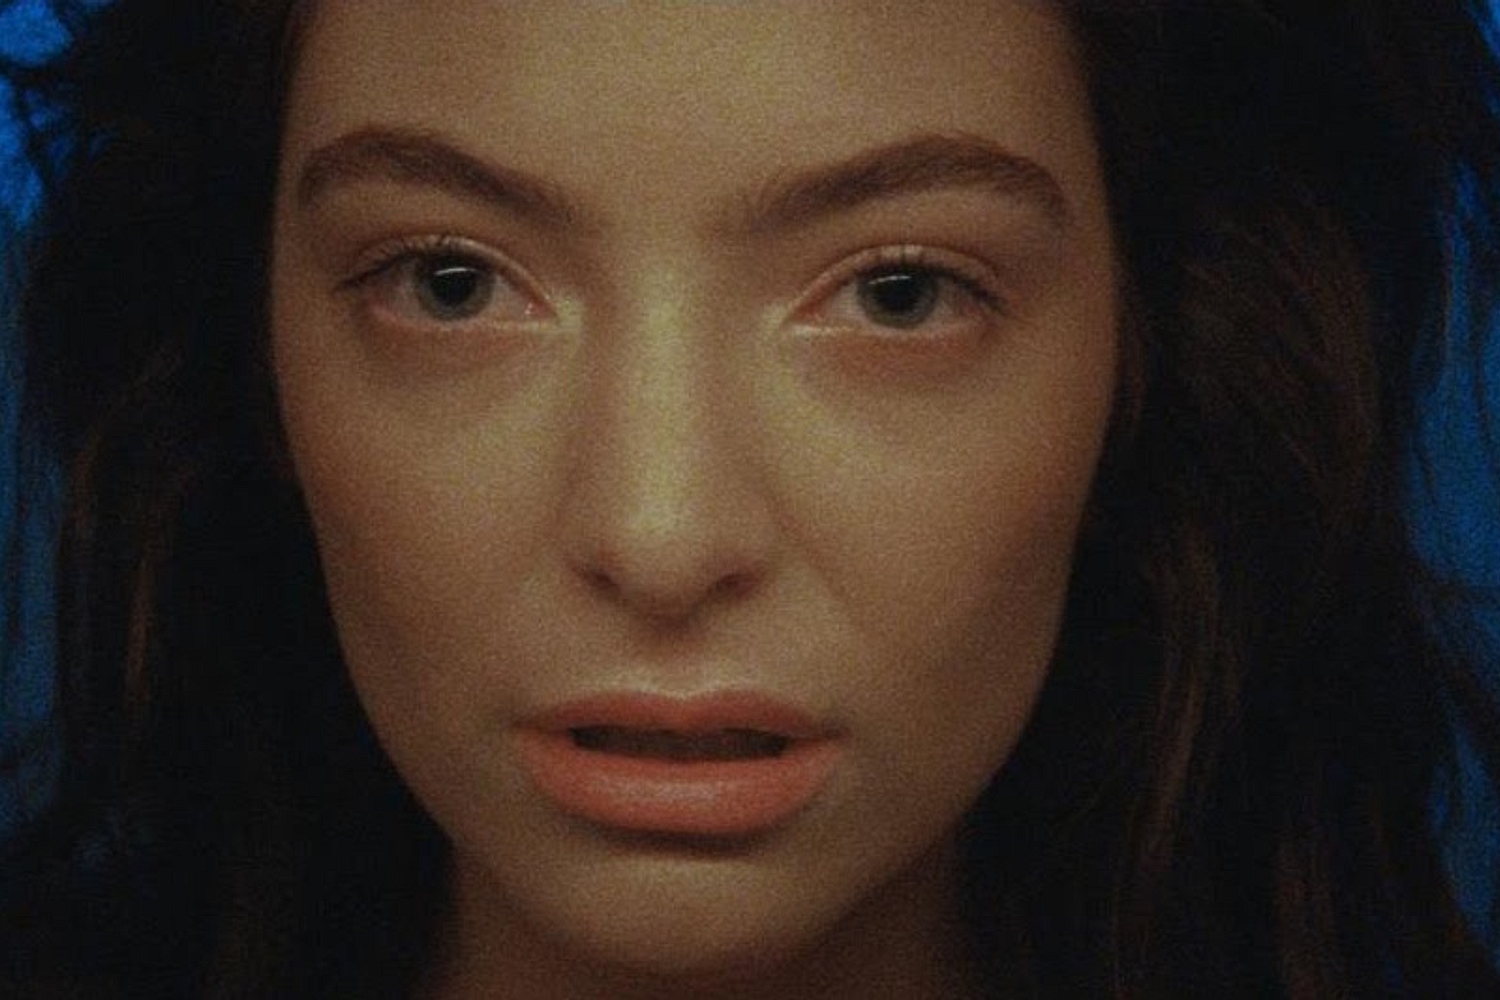 Lorde talks ‘Green Light’ and new album ‘Melodrama’ in new interview